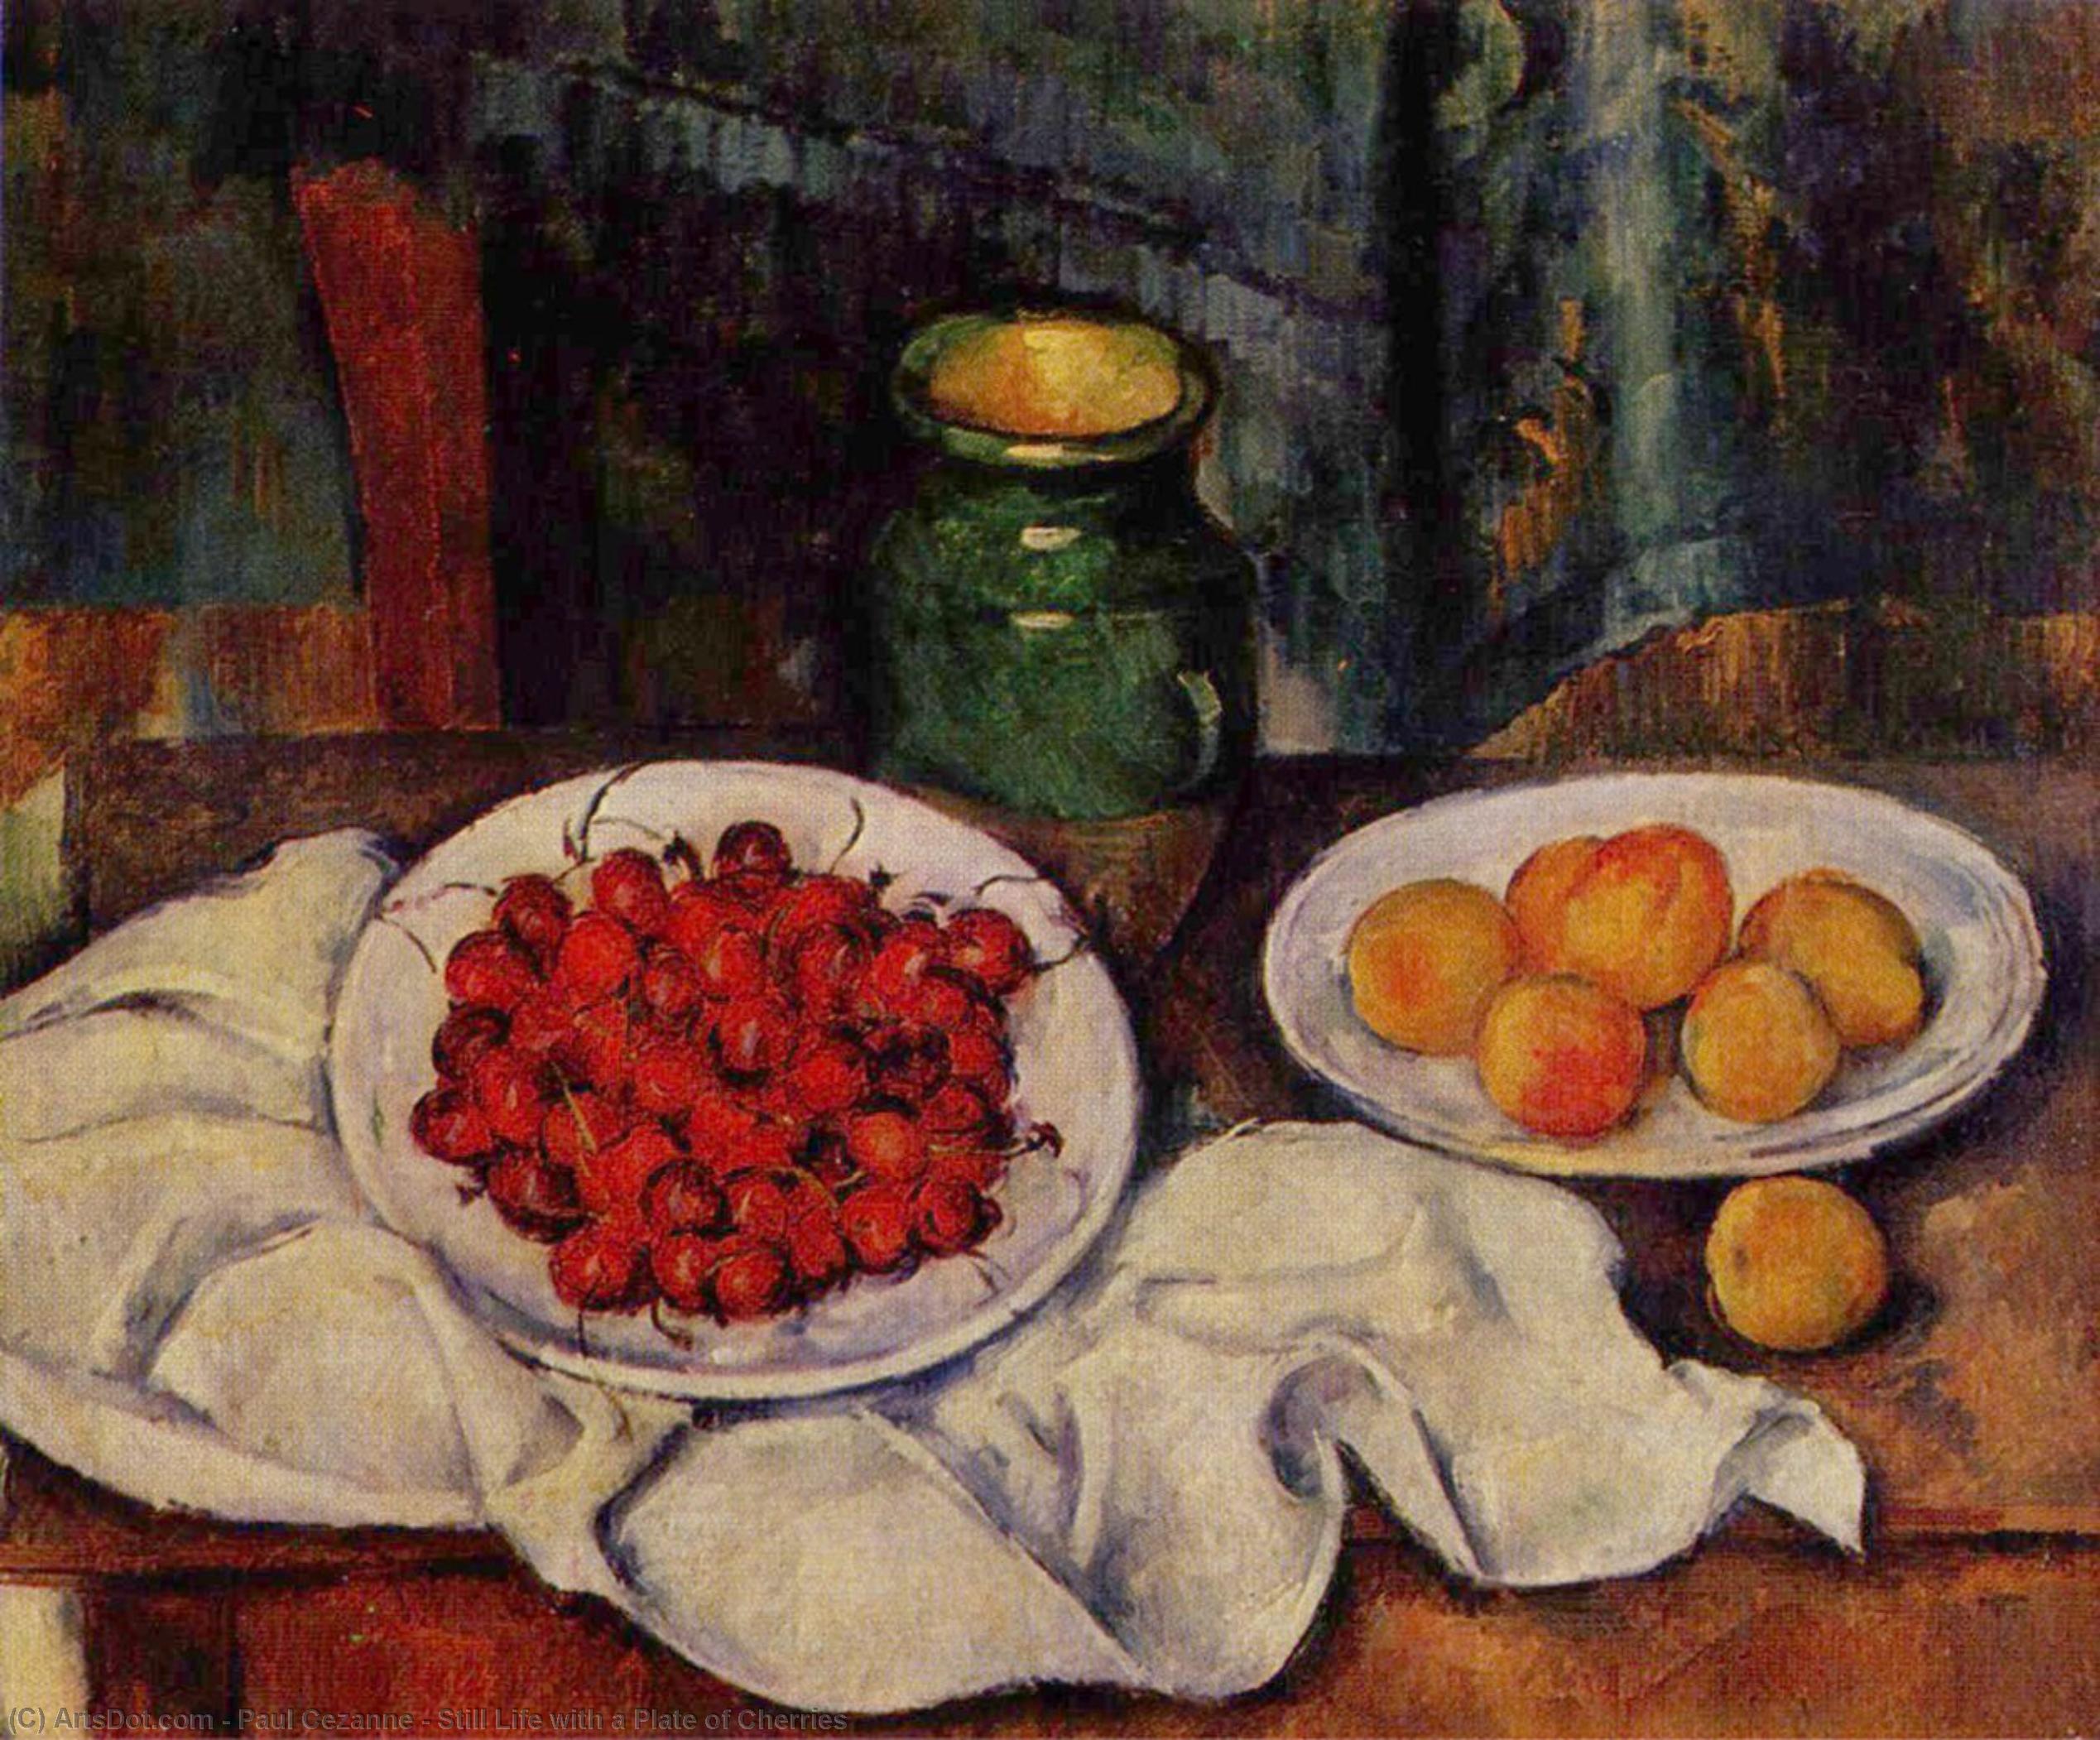 Wikioo.org - สารานุกรมวิจิตรศิลป์ - จิตรกรรม Paul Cezanne - Still Life with a Plate of Cherries